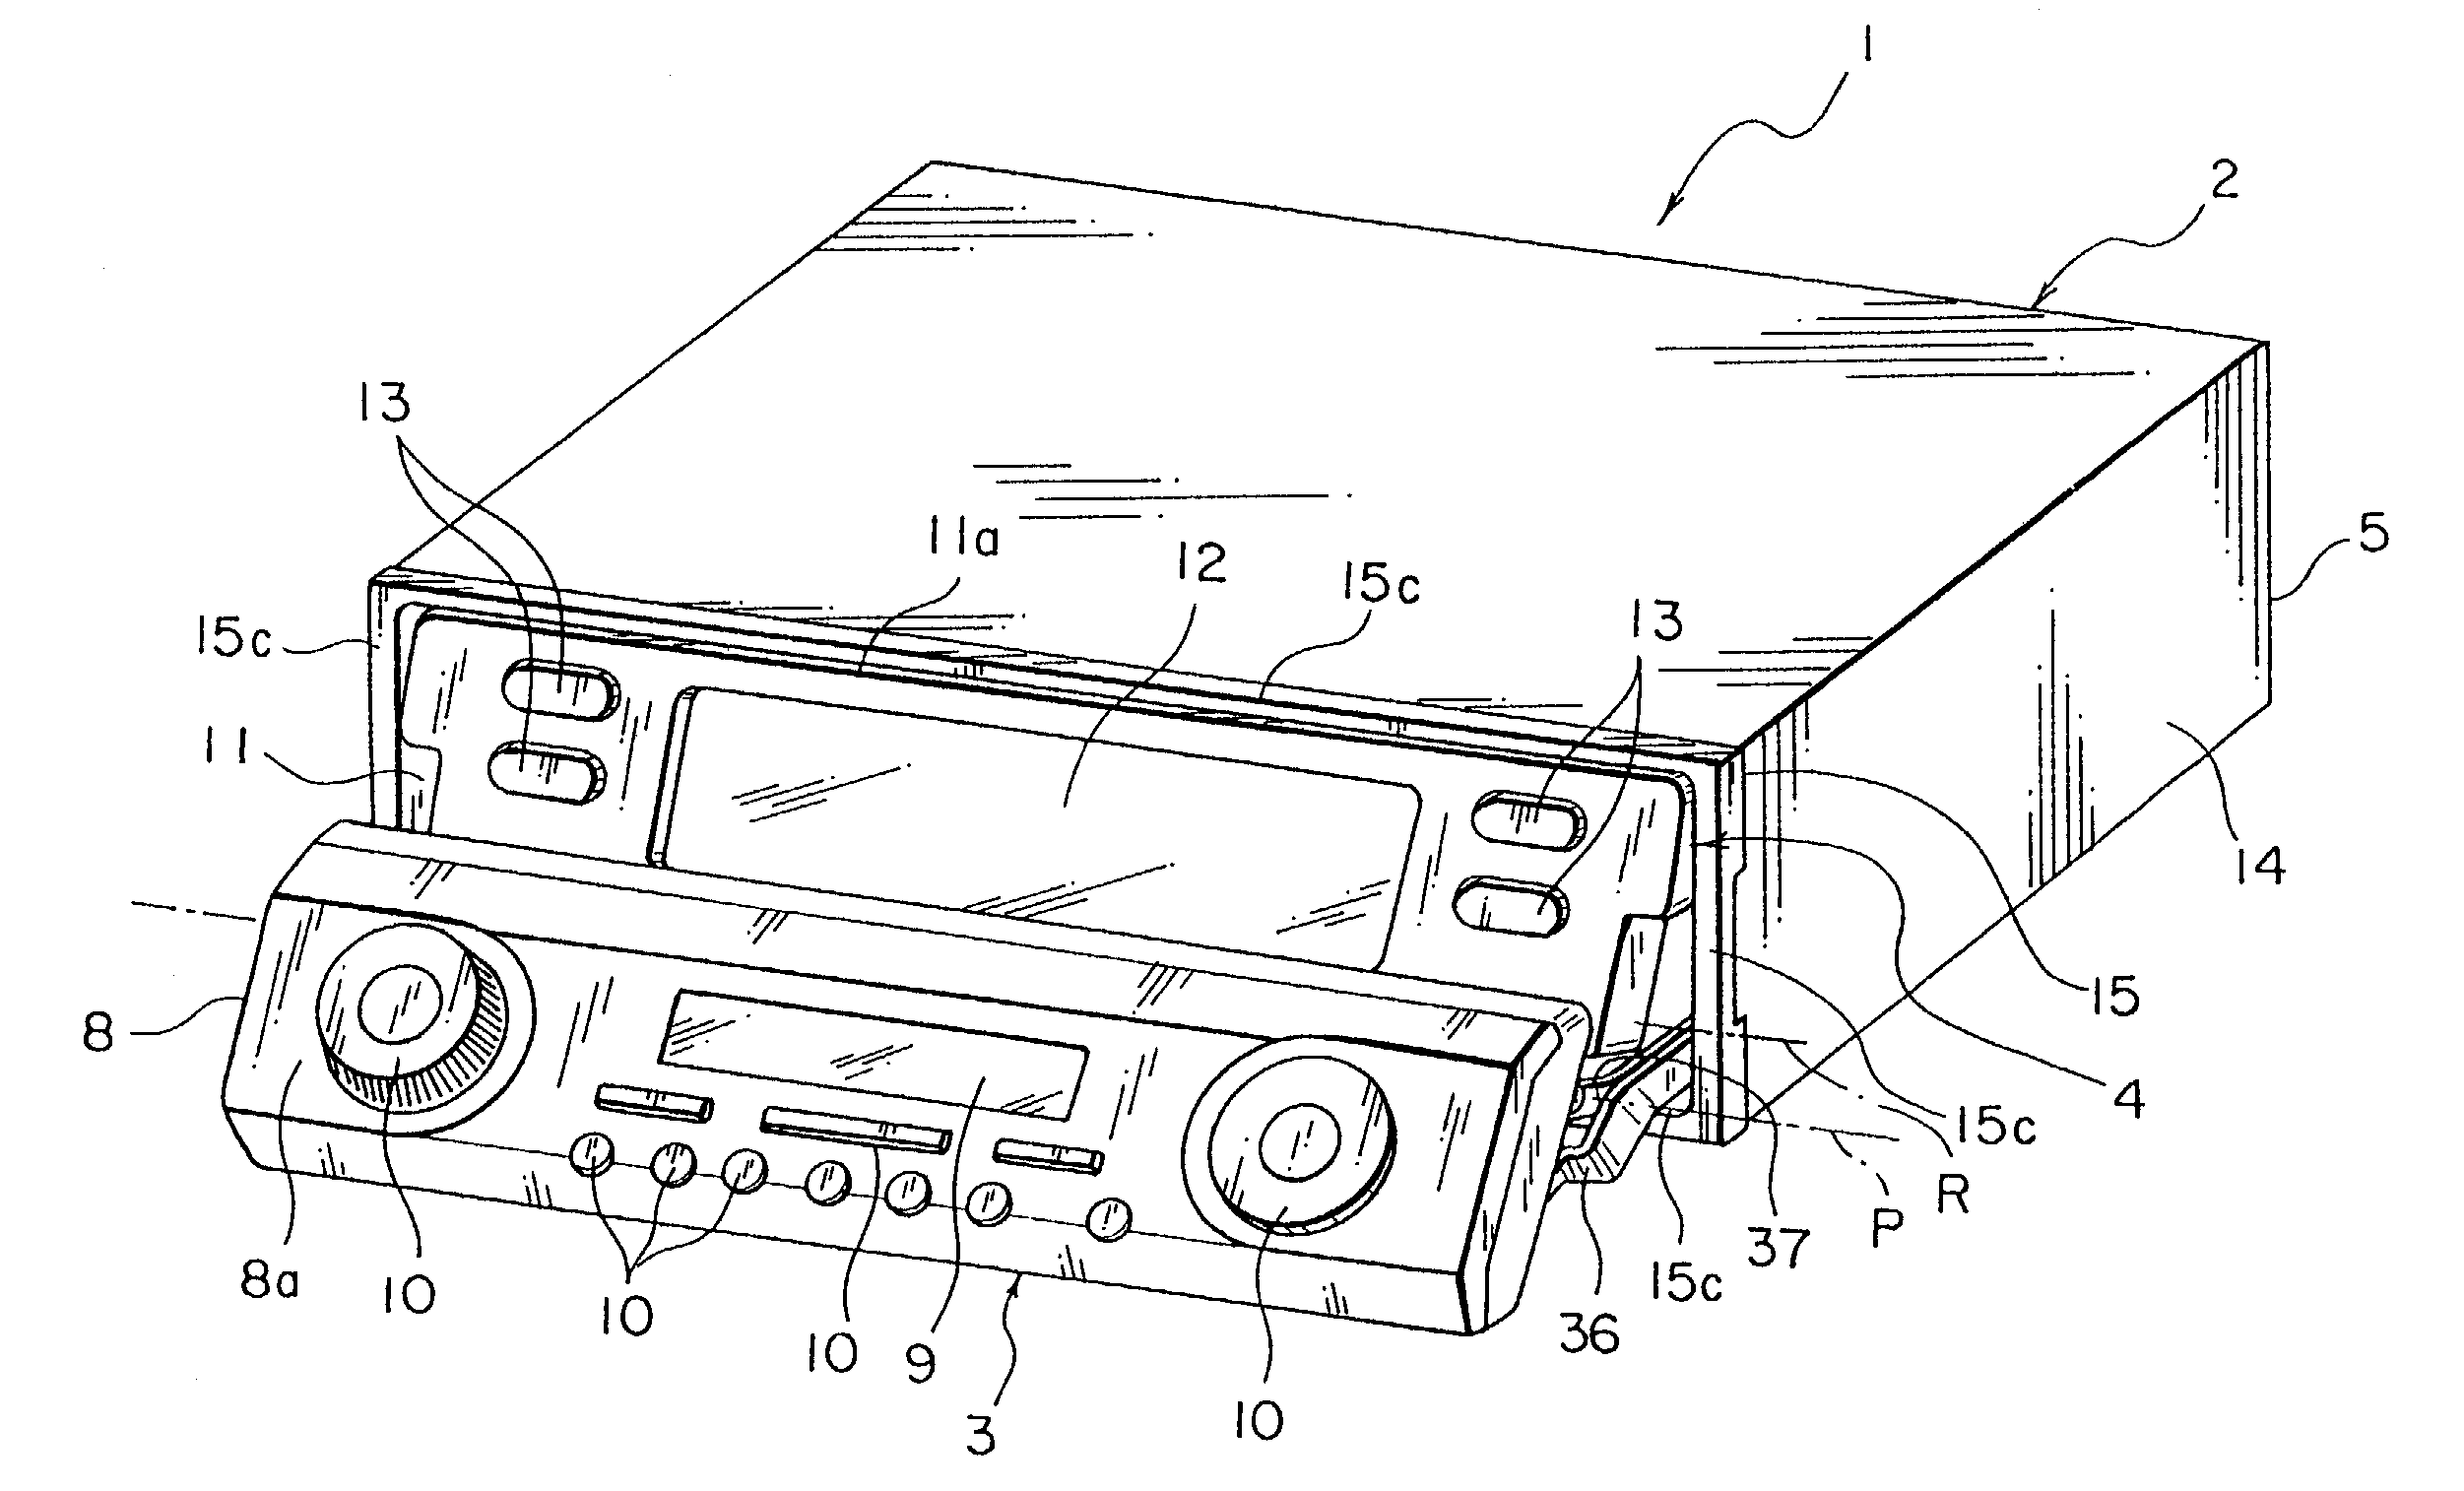 Electronic instrument having first and second operation units